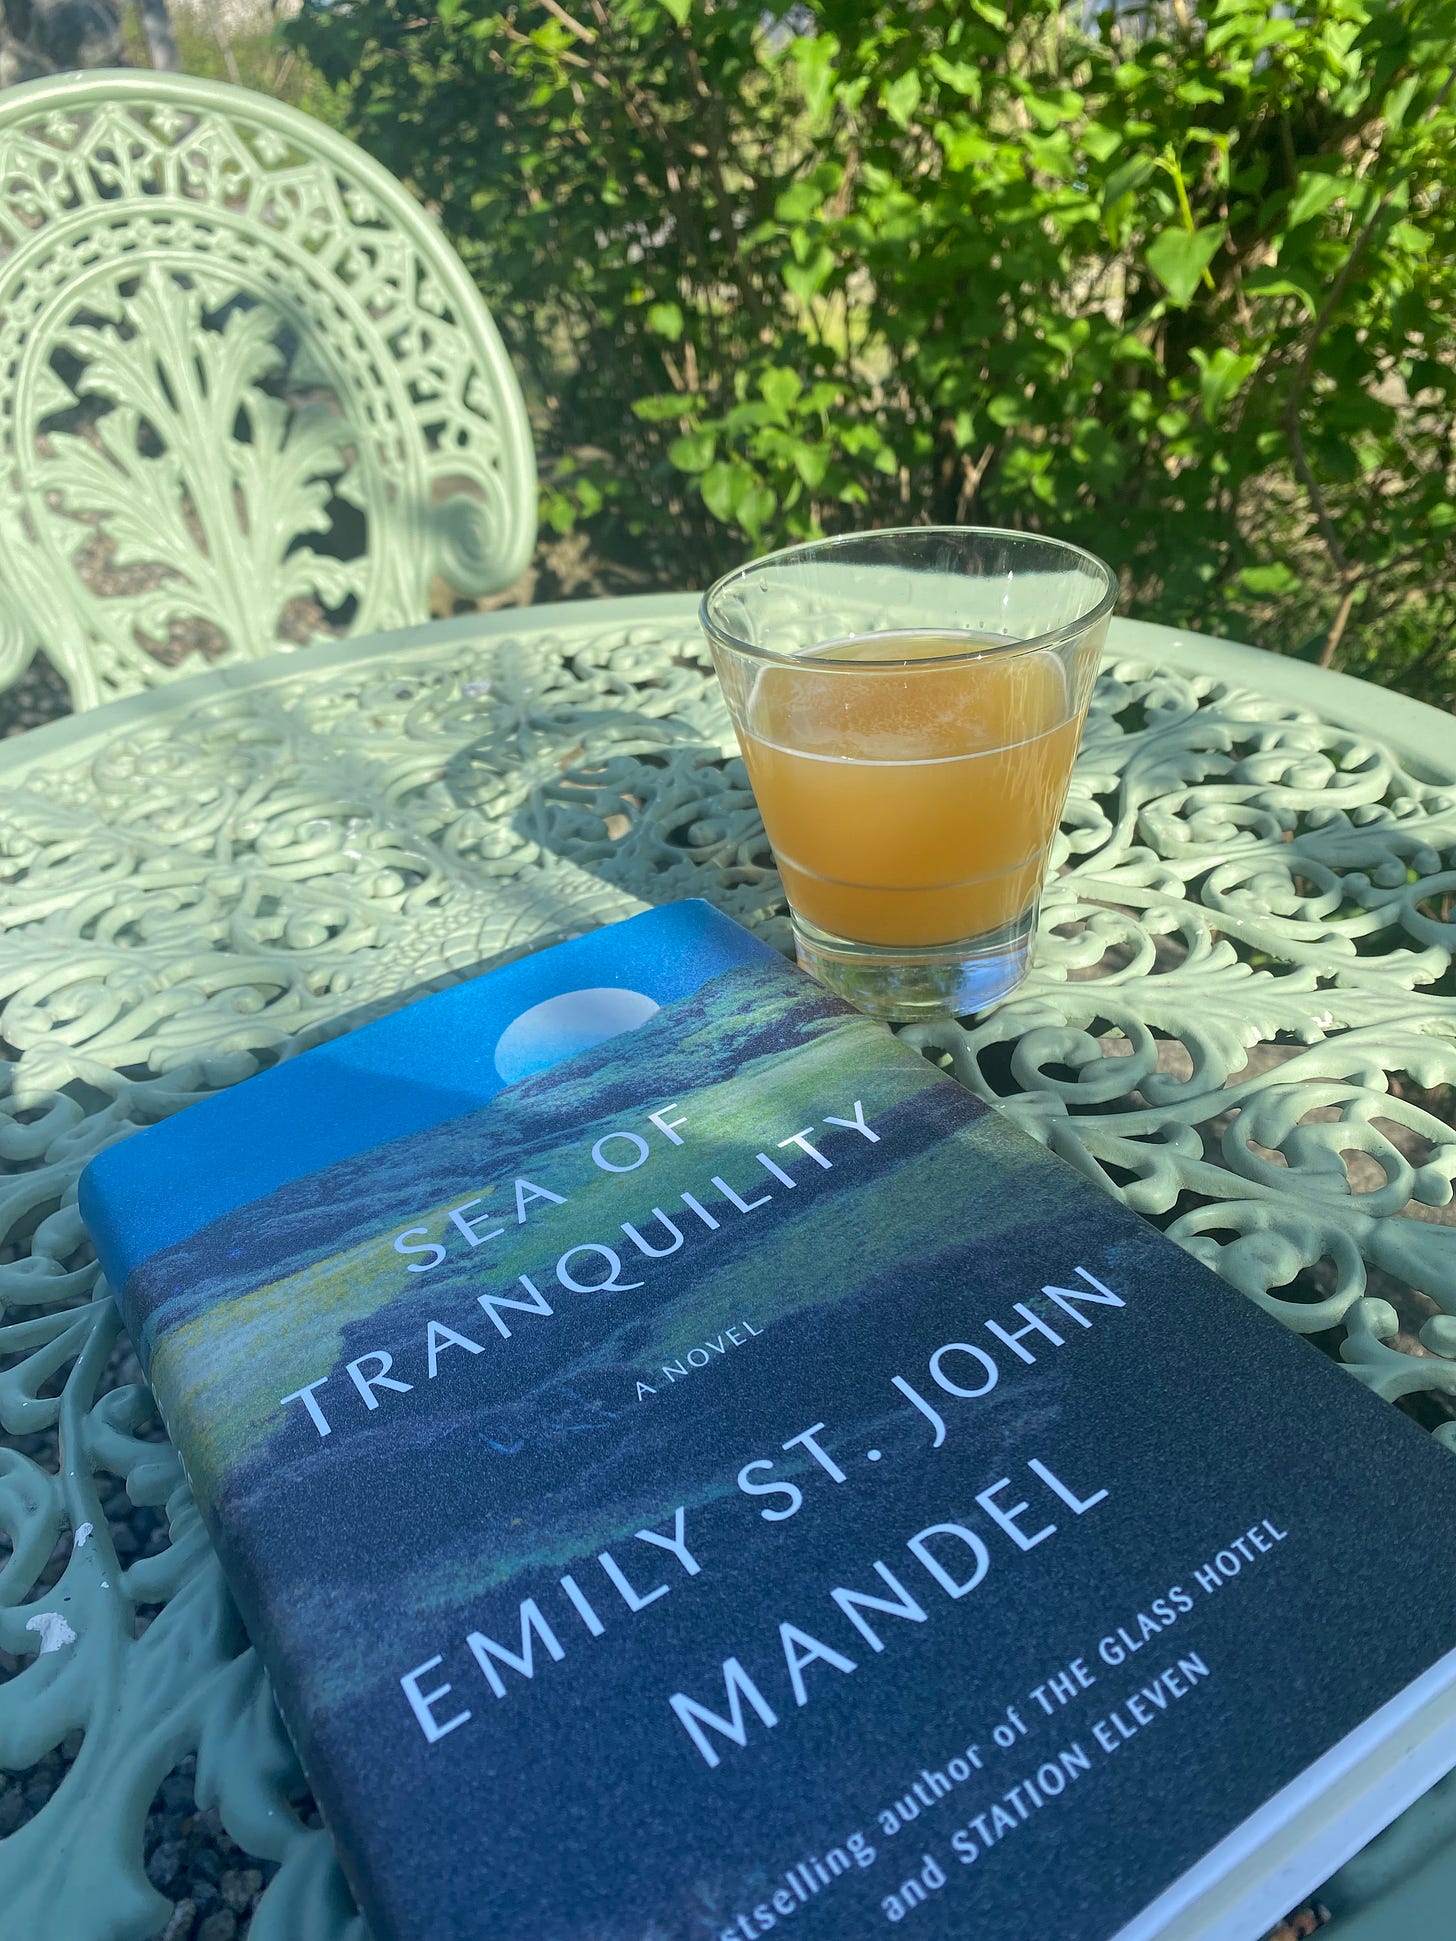 A mint green wrought-iron table in the sun. In the shaded half of the table is a glass of beer next to a hardcover novel, "Sea of Tranquility" by Emily St John Mandel. In the background is an empty chair matching the table, and leaves of a lilac bush.